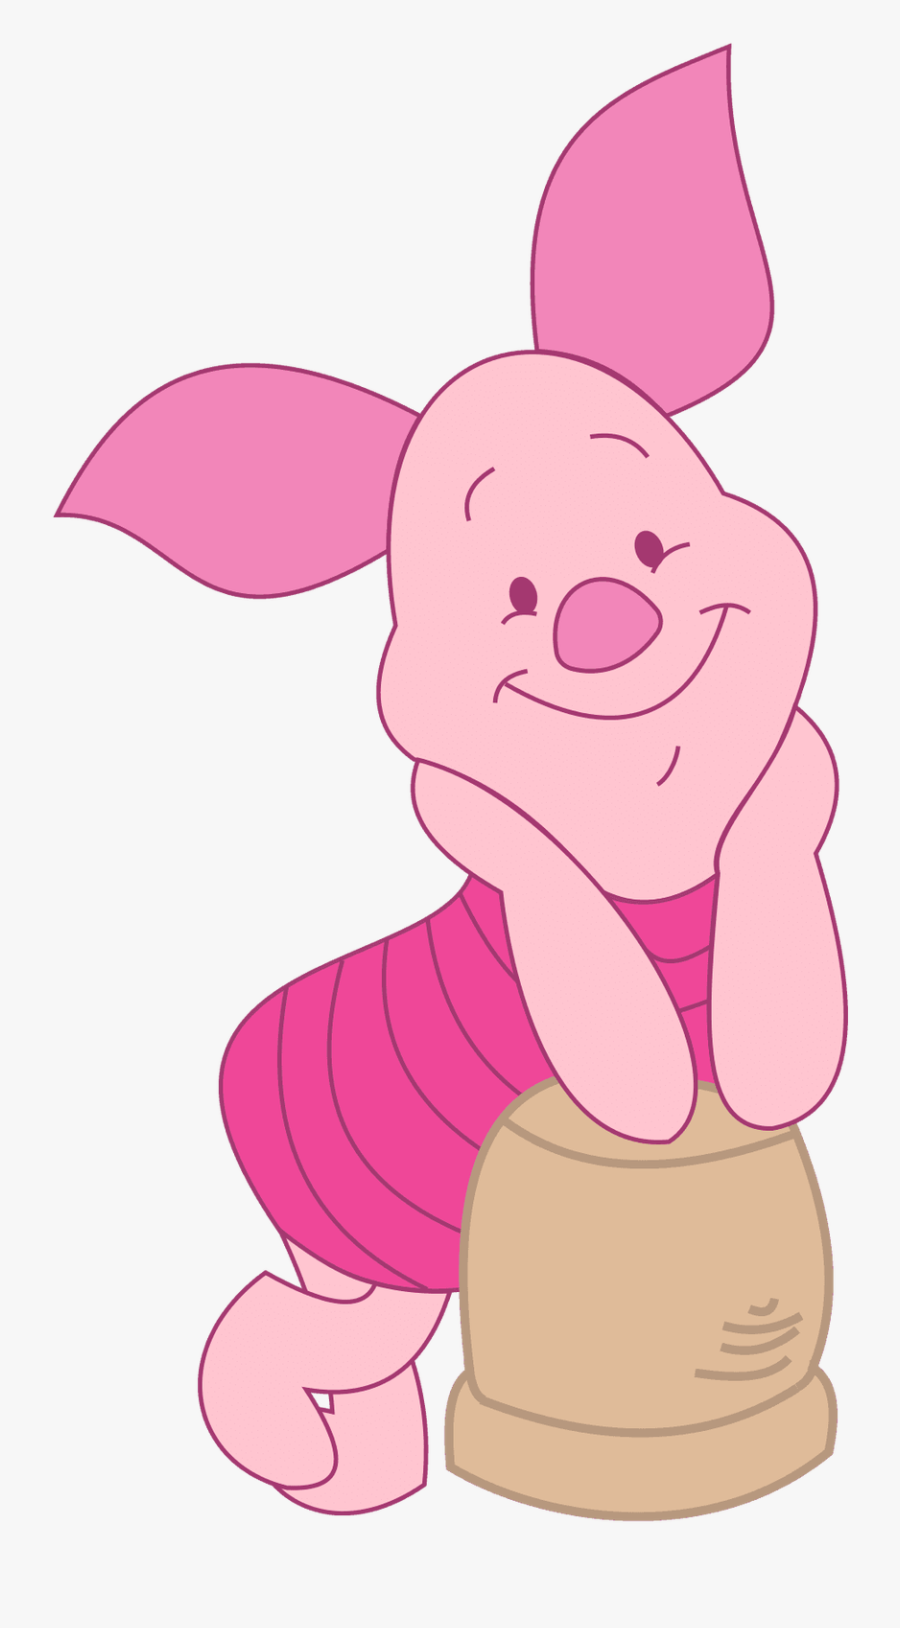 Piglet Clipart Animal, Disney - Piglet Png, free clipart download, png, cli...